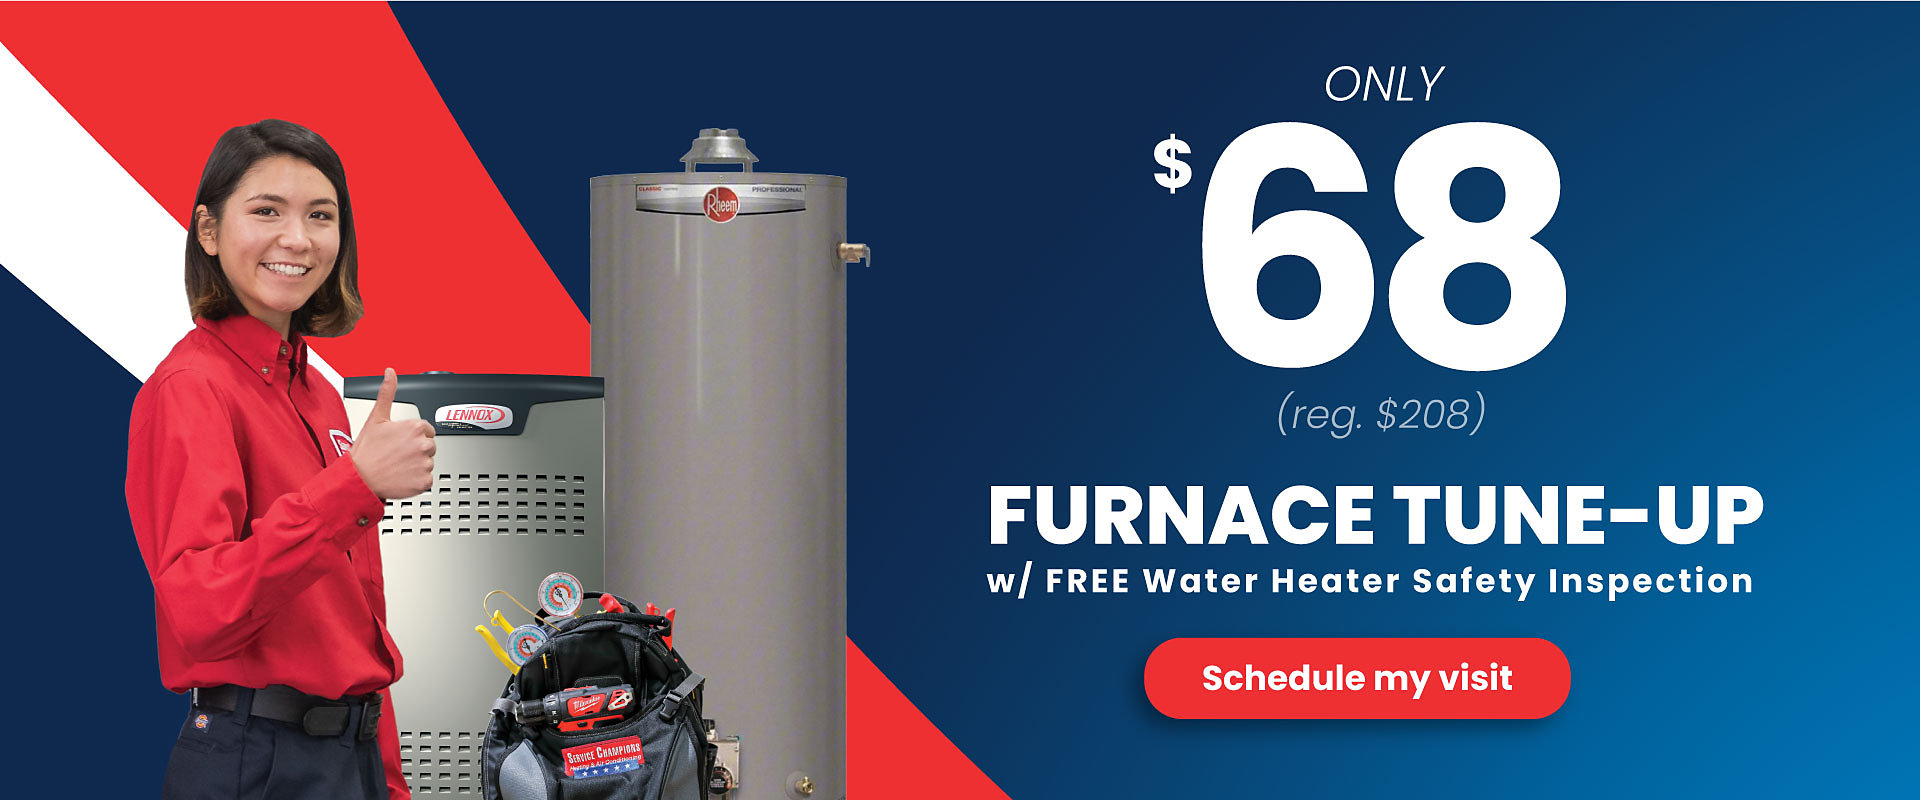 $68 Furnace Tune-Up w/ FREE Water Heater Safety Inspection